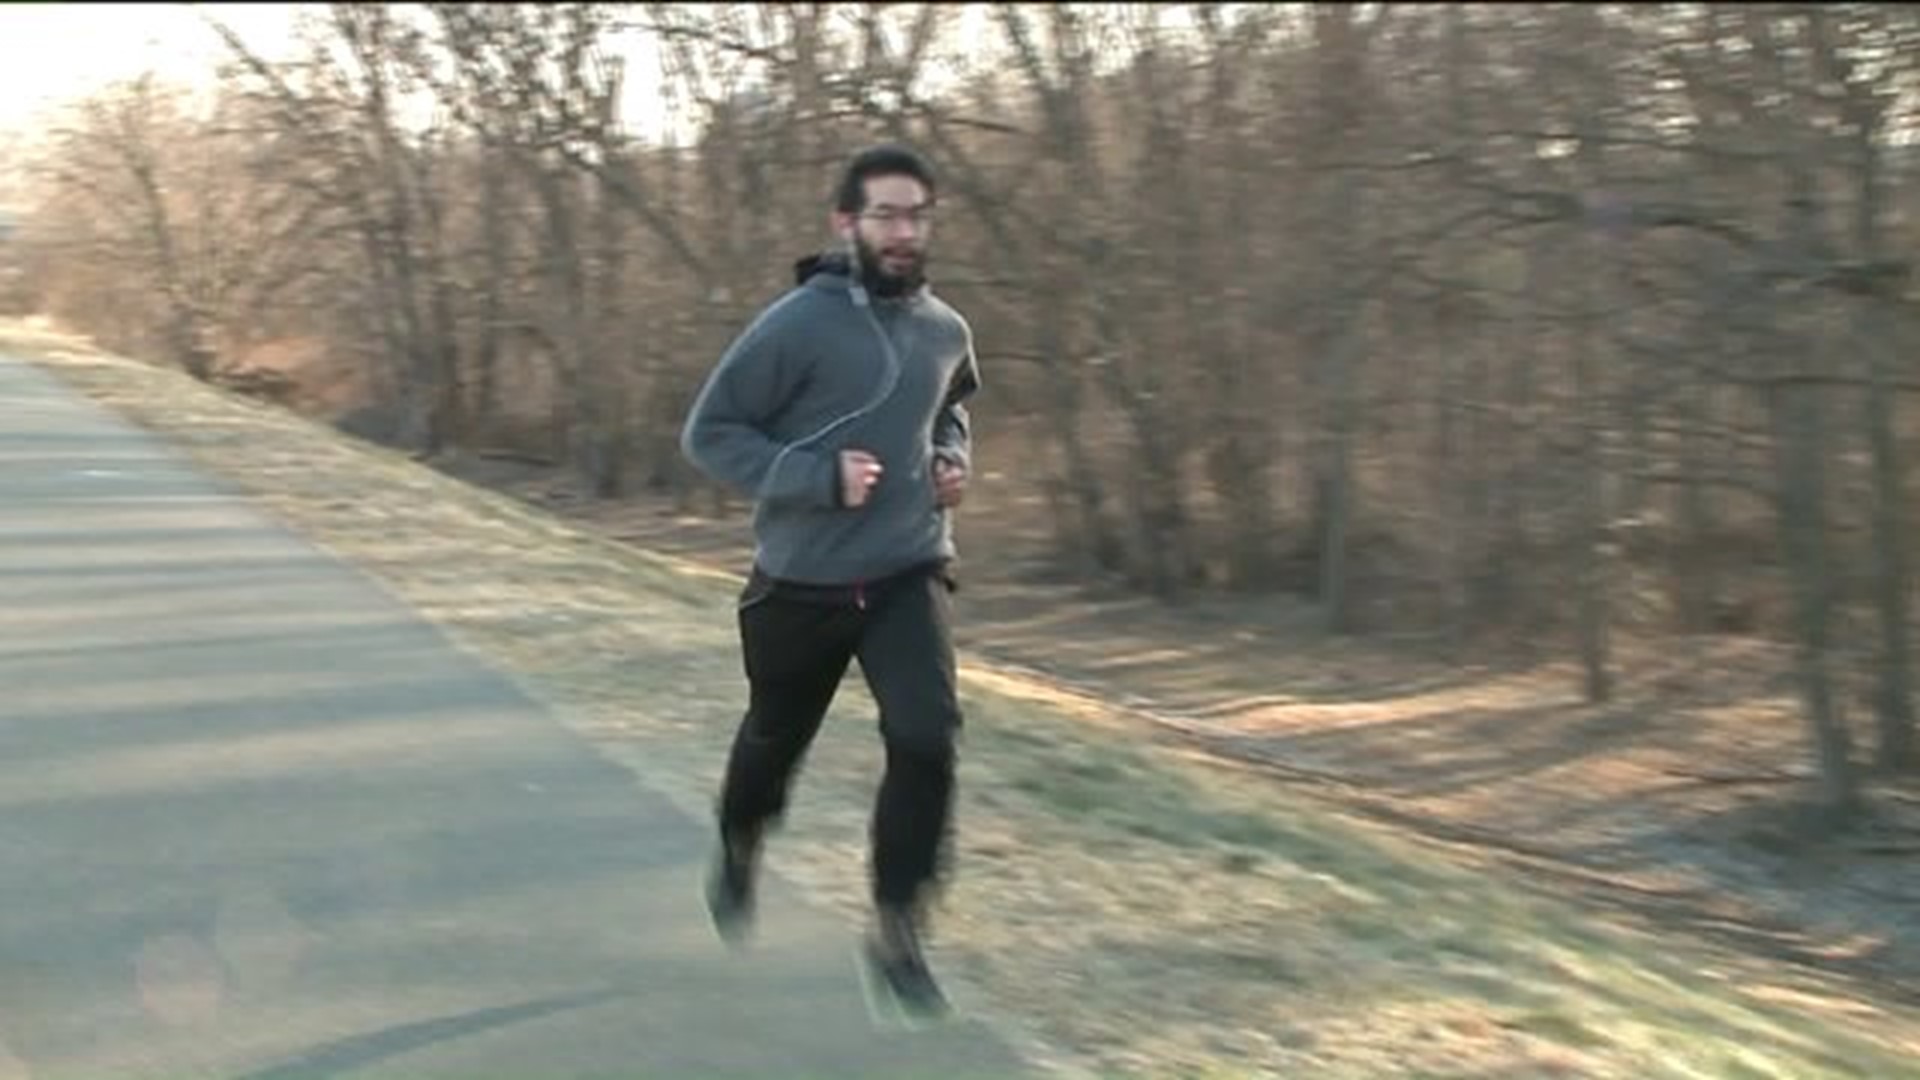 Relay Race Raises Money to Help Families with Heating Bills